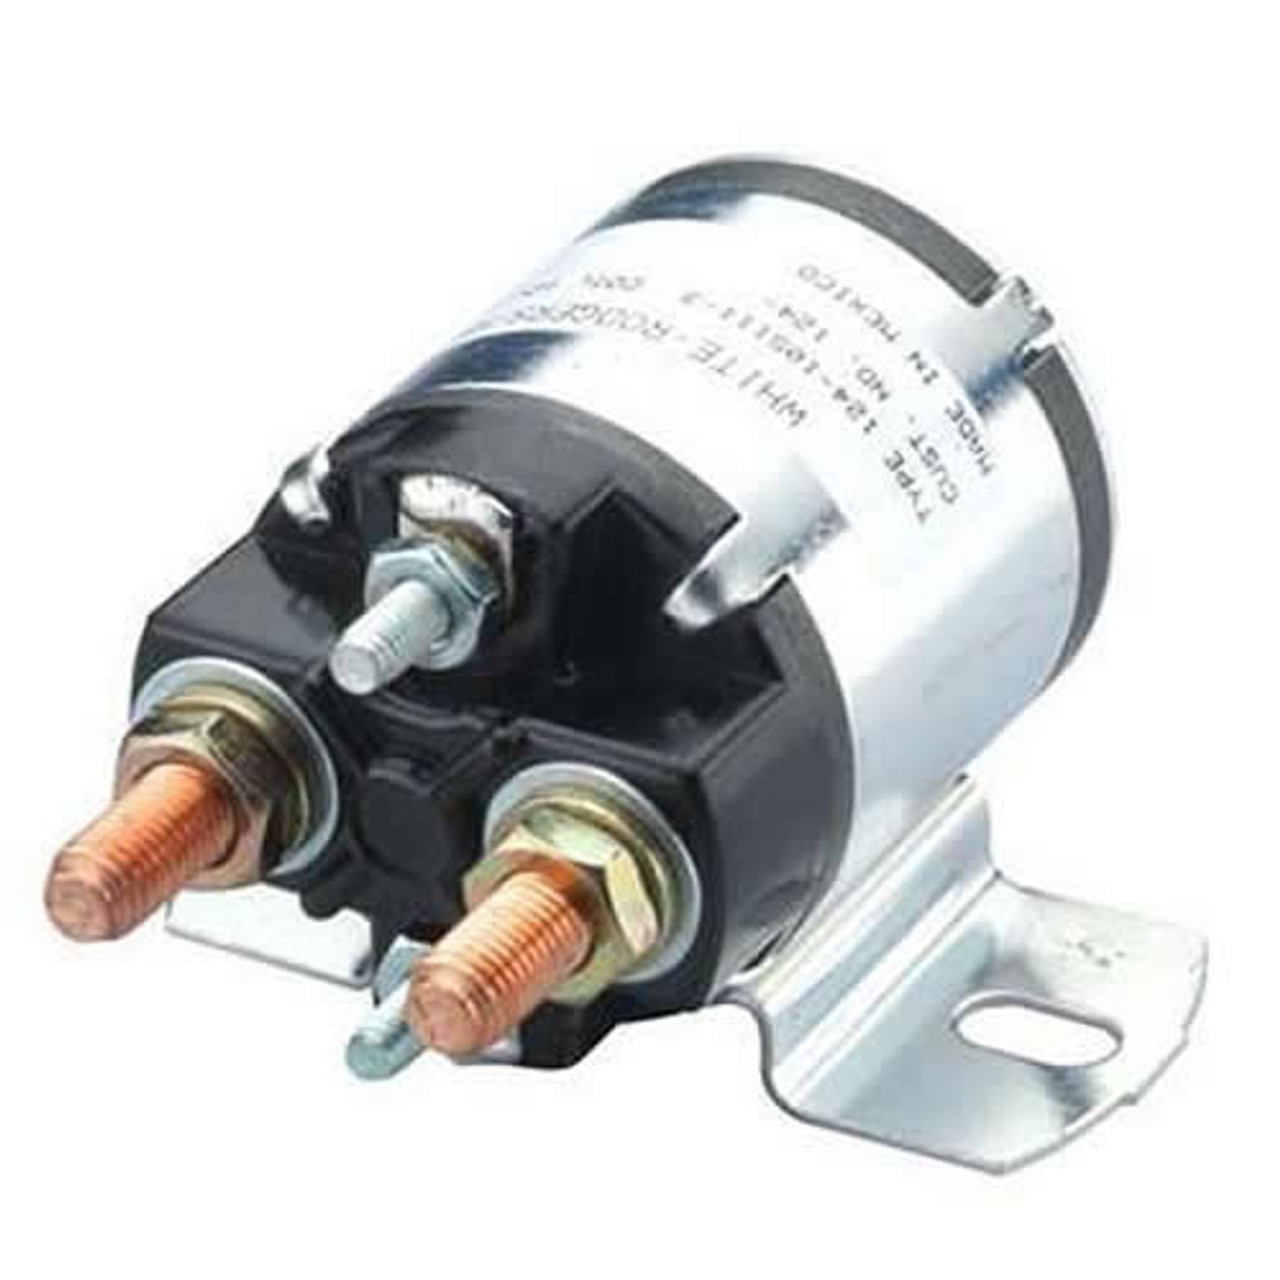 Auxiliary Solenoid 12v 4 Terminal  Continuous 124-902